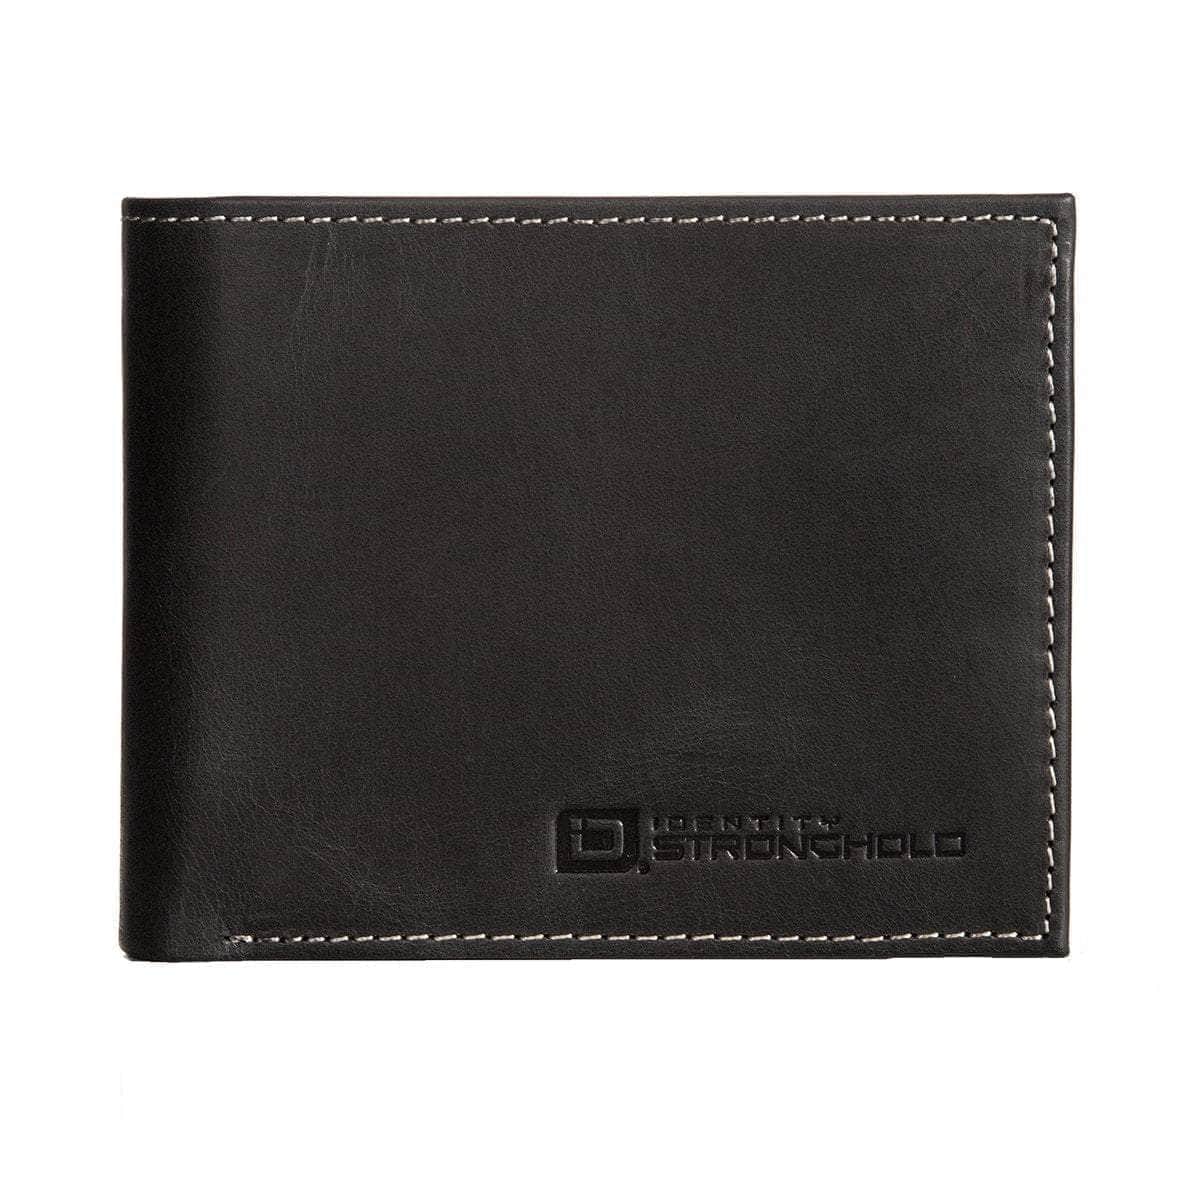 Top 9 Stylish Luxury Wallets for Men and Women in Trend  Leather wallet  design, Wallet fashion, Genuine leather wallets